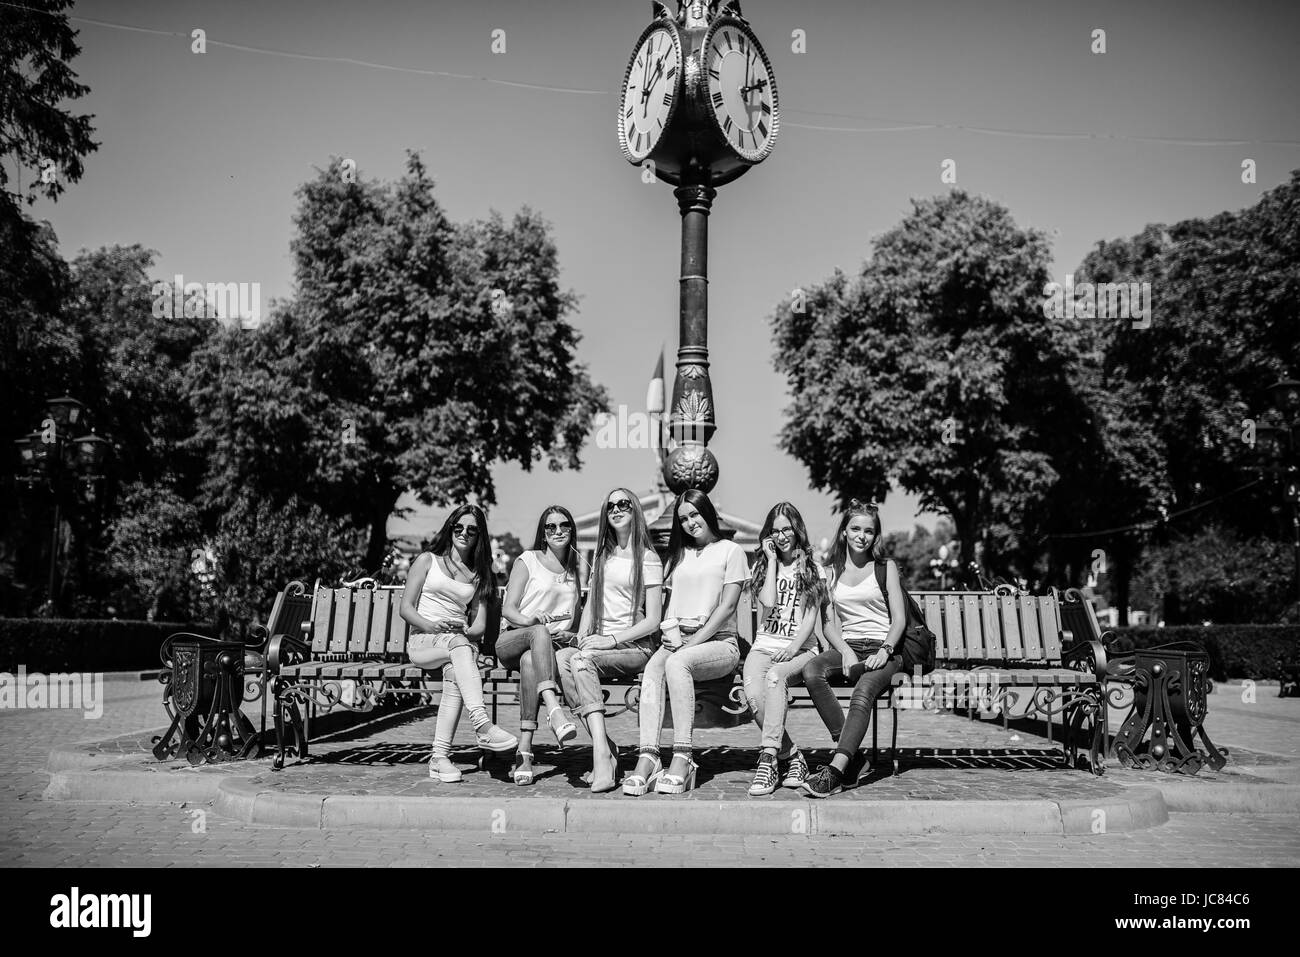 Six beautiful young girls sitting on a bench next to the old street clock in the park. Black and white photo. Stock Photo